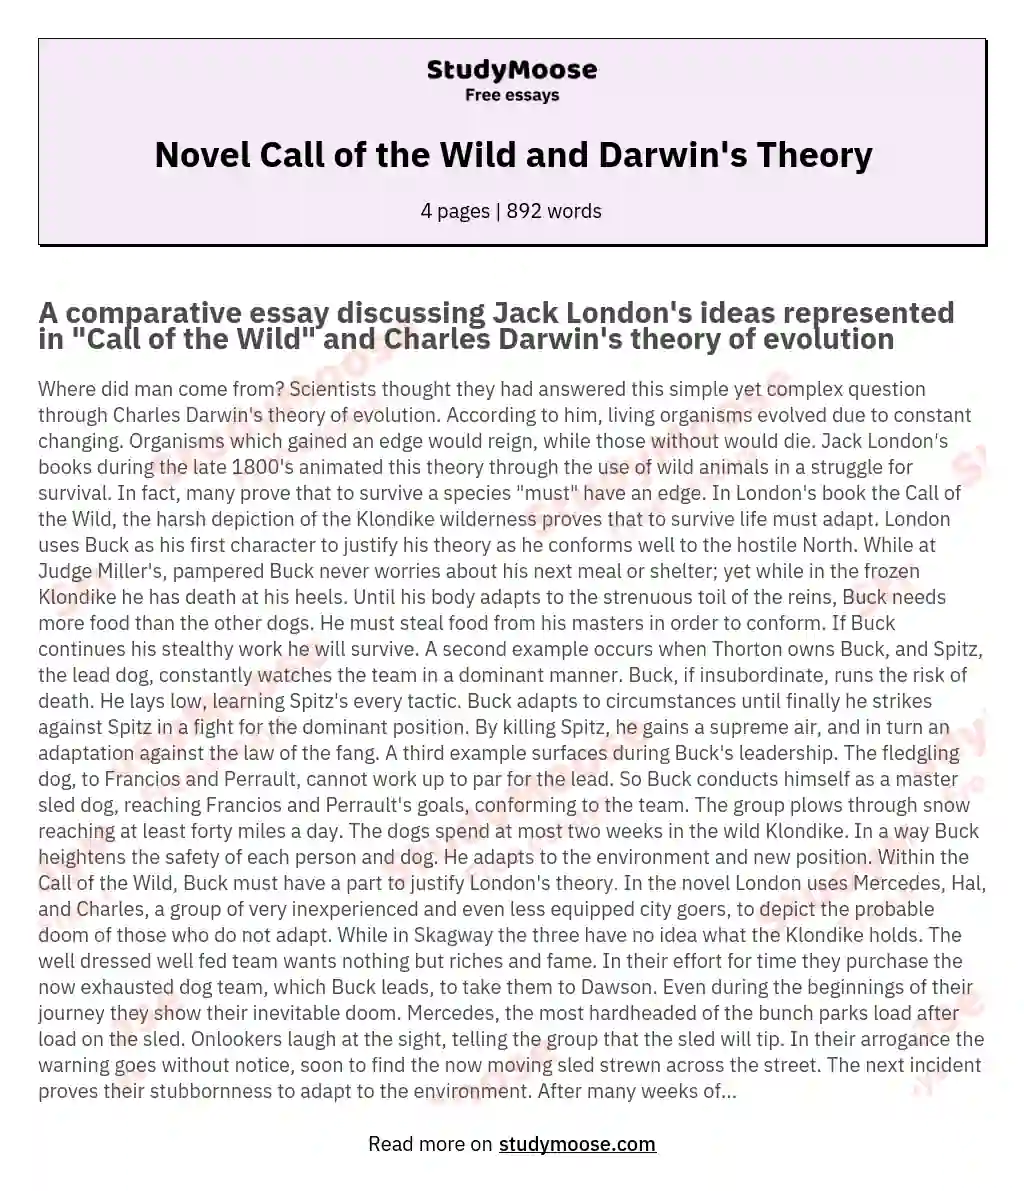 Novel Call of the Wild and Darwin's Theory essay